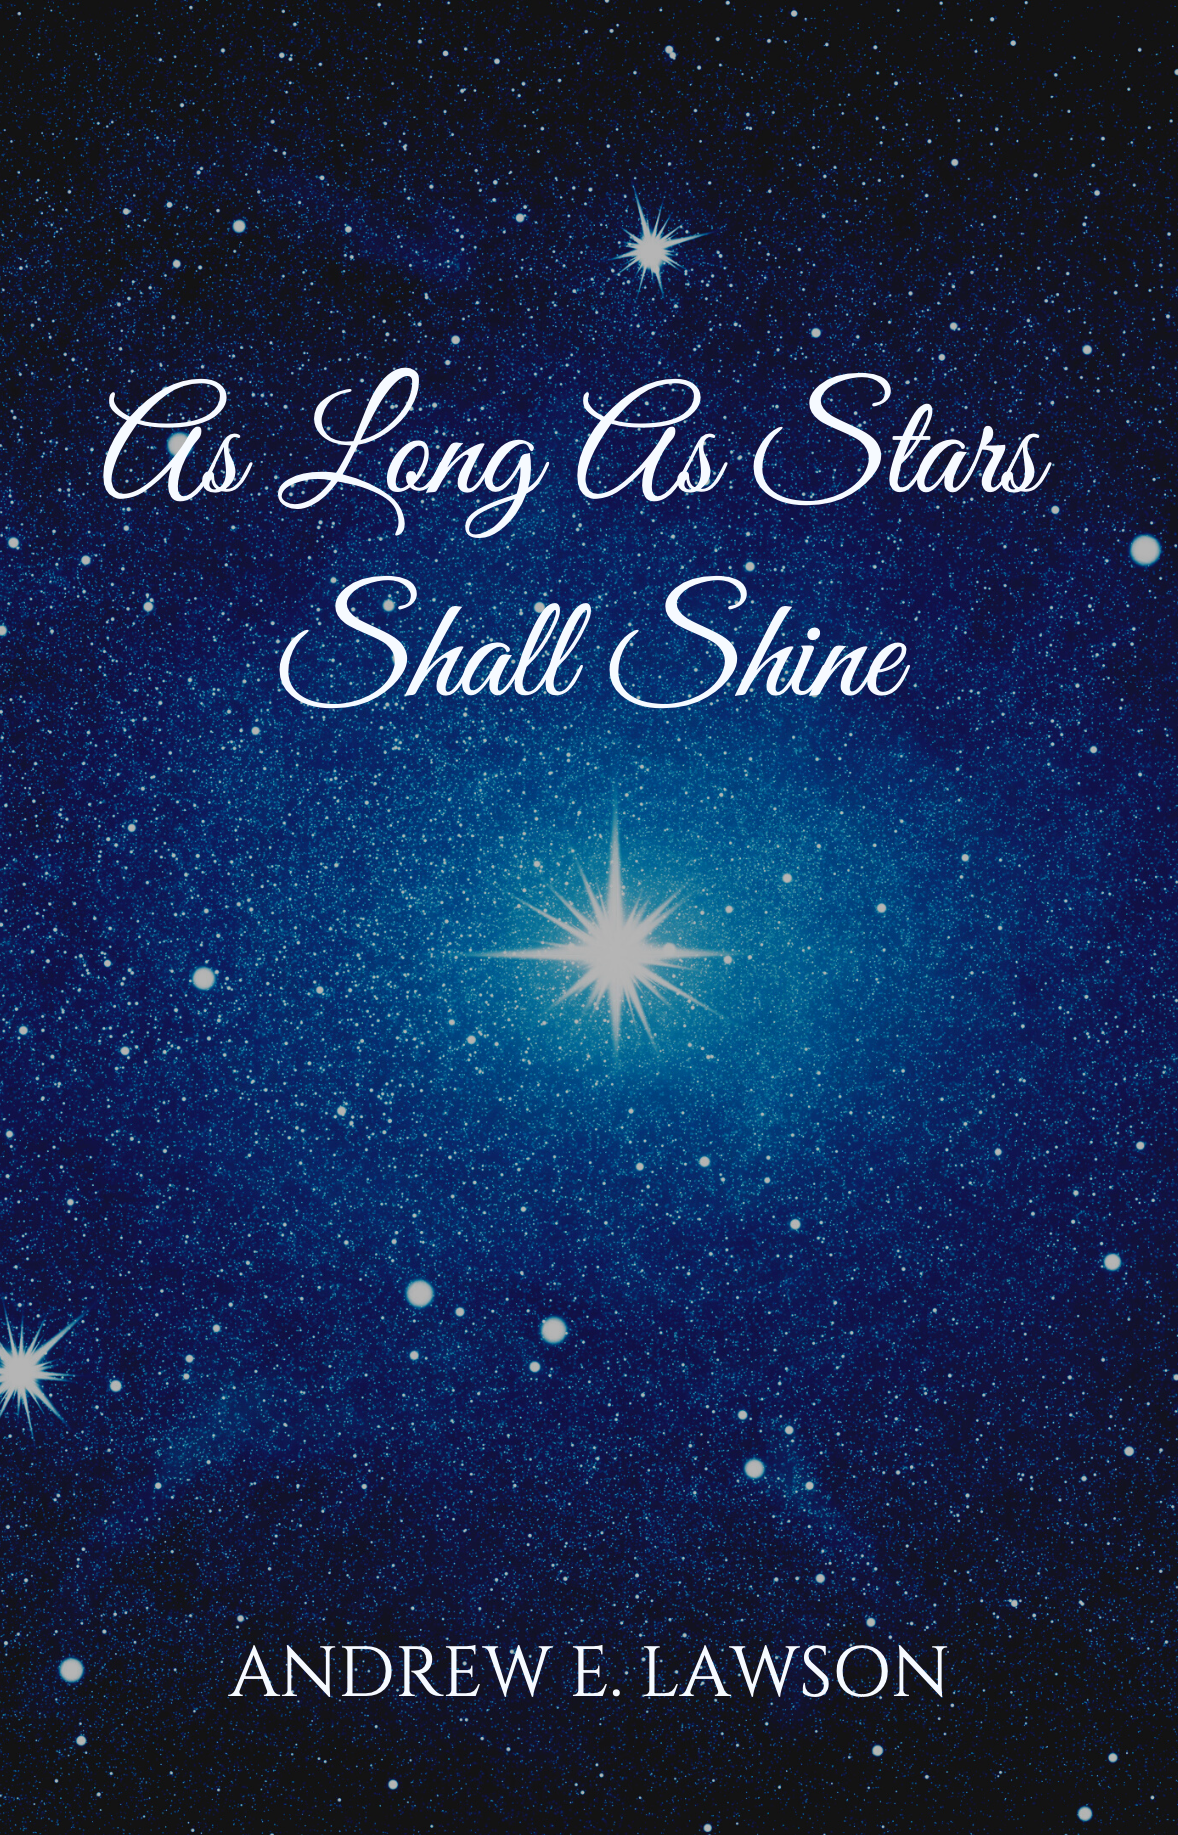 As Long As Stars Shall Shine by Andrew E. Lawson